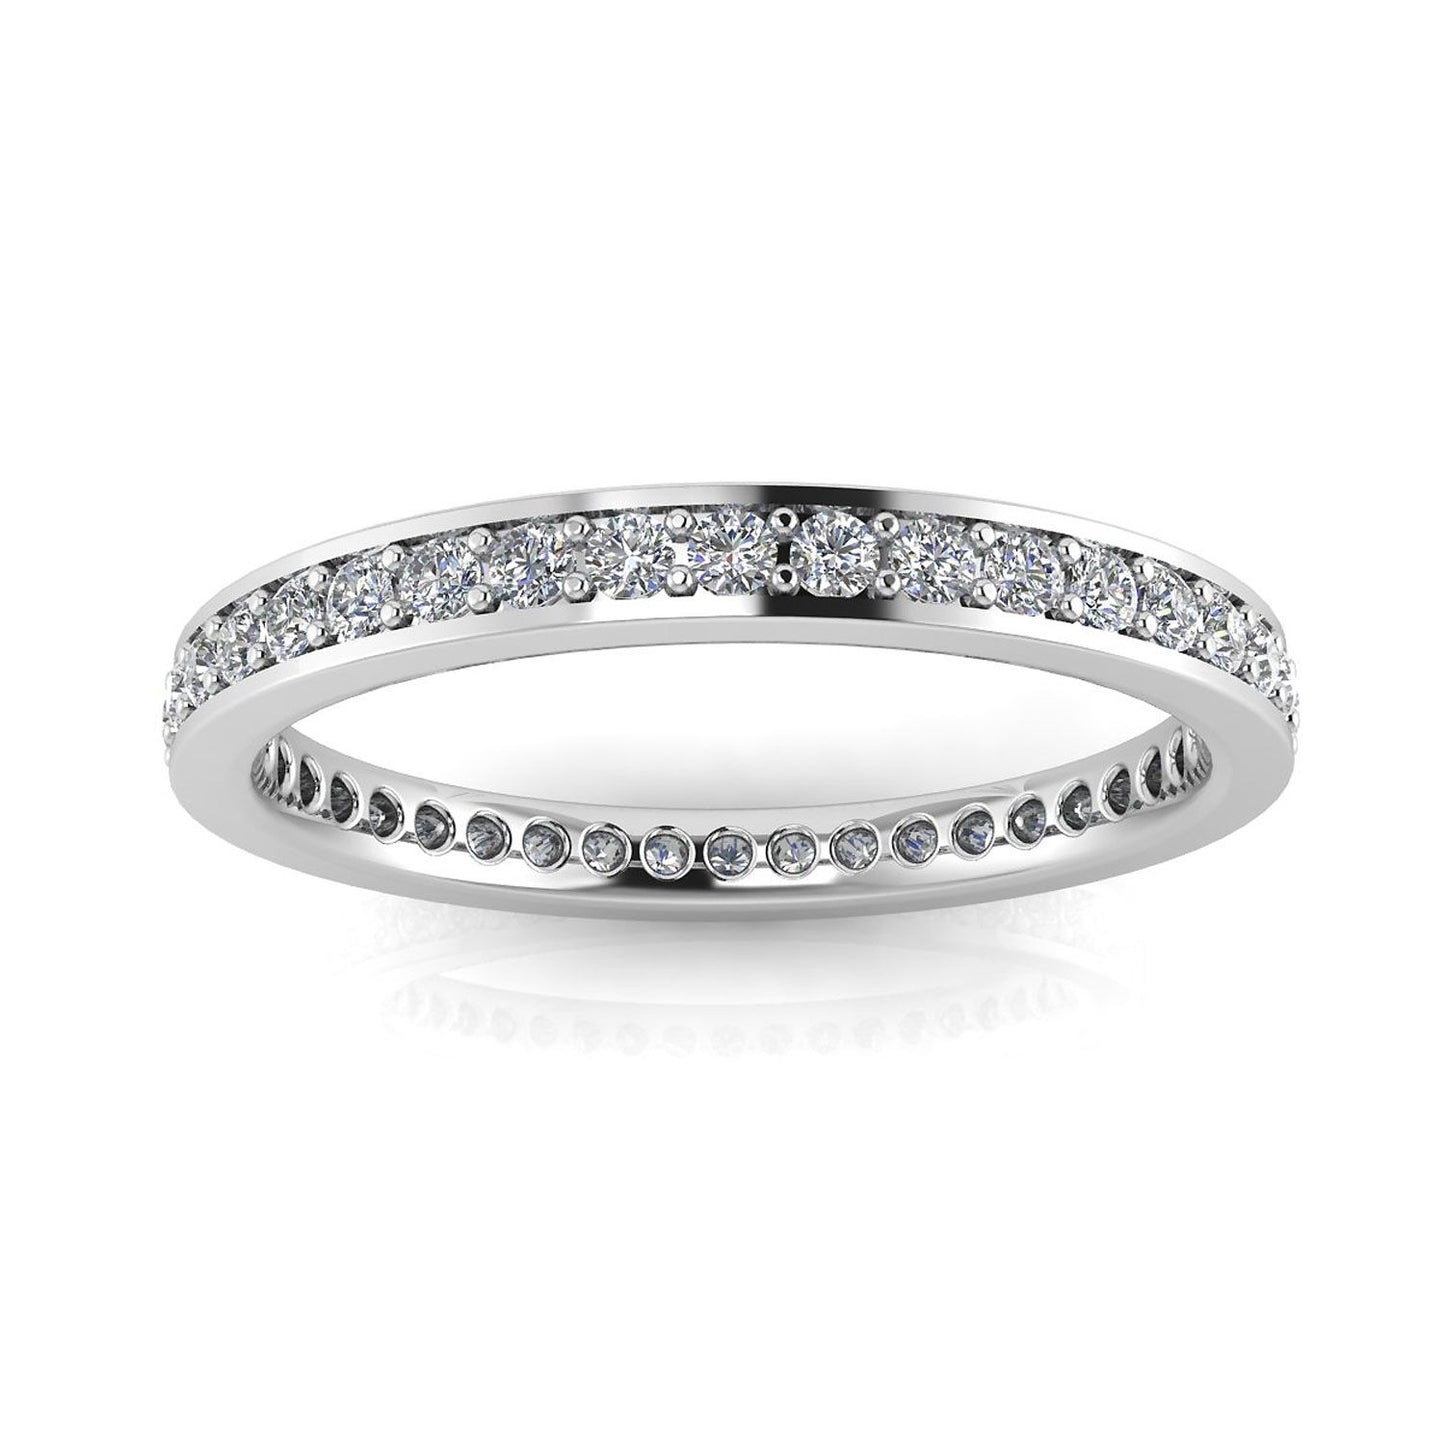 Round Brilliant Cut Diamond Channel Pave Set Eternity Ring In 18k White Gold  (0.33ct. Tw.) Ring Size 7